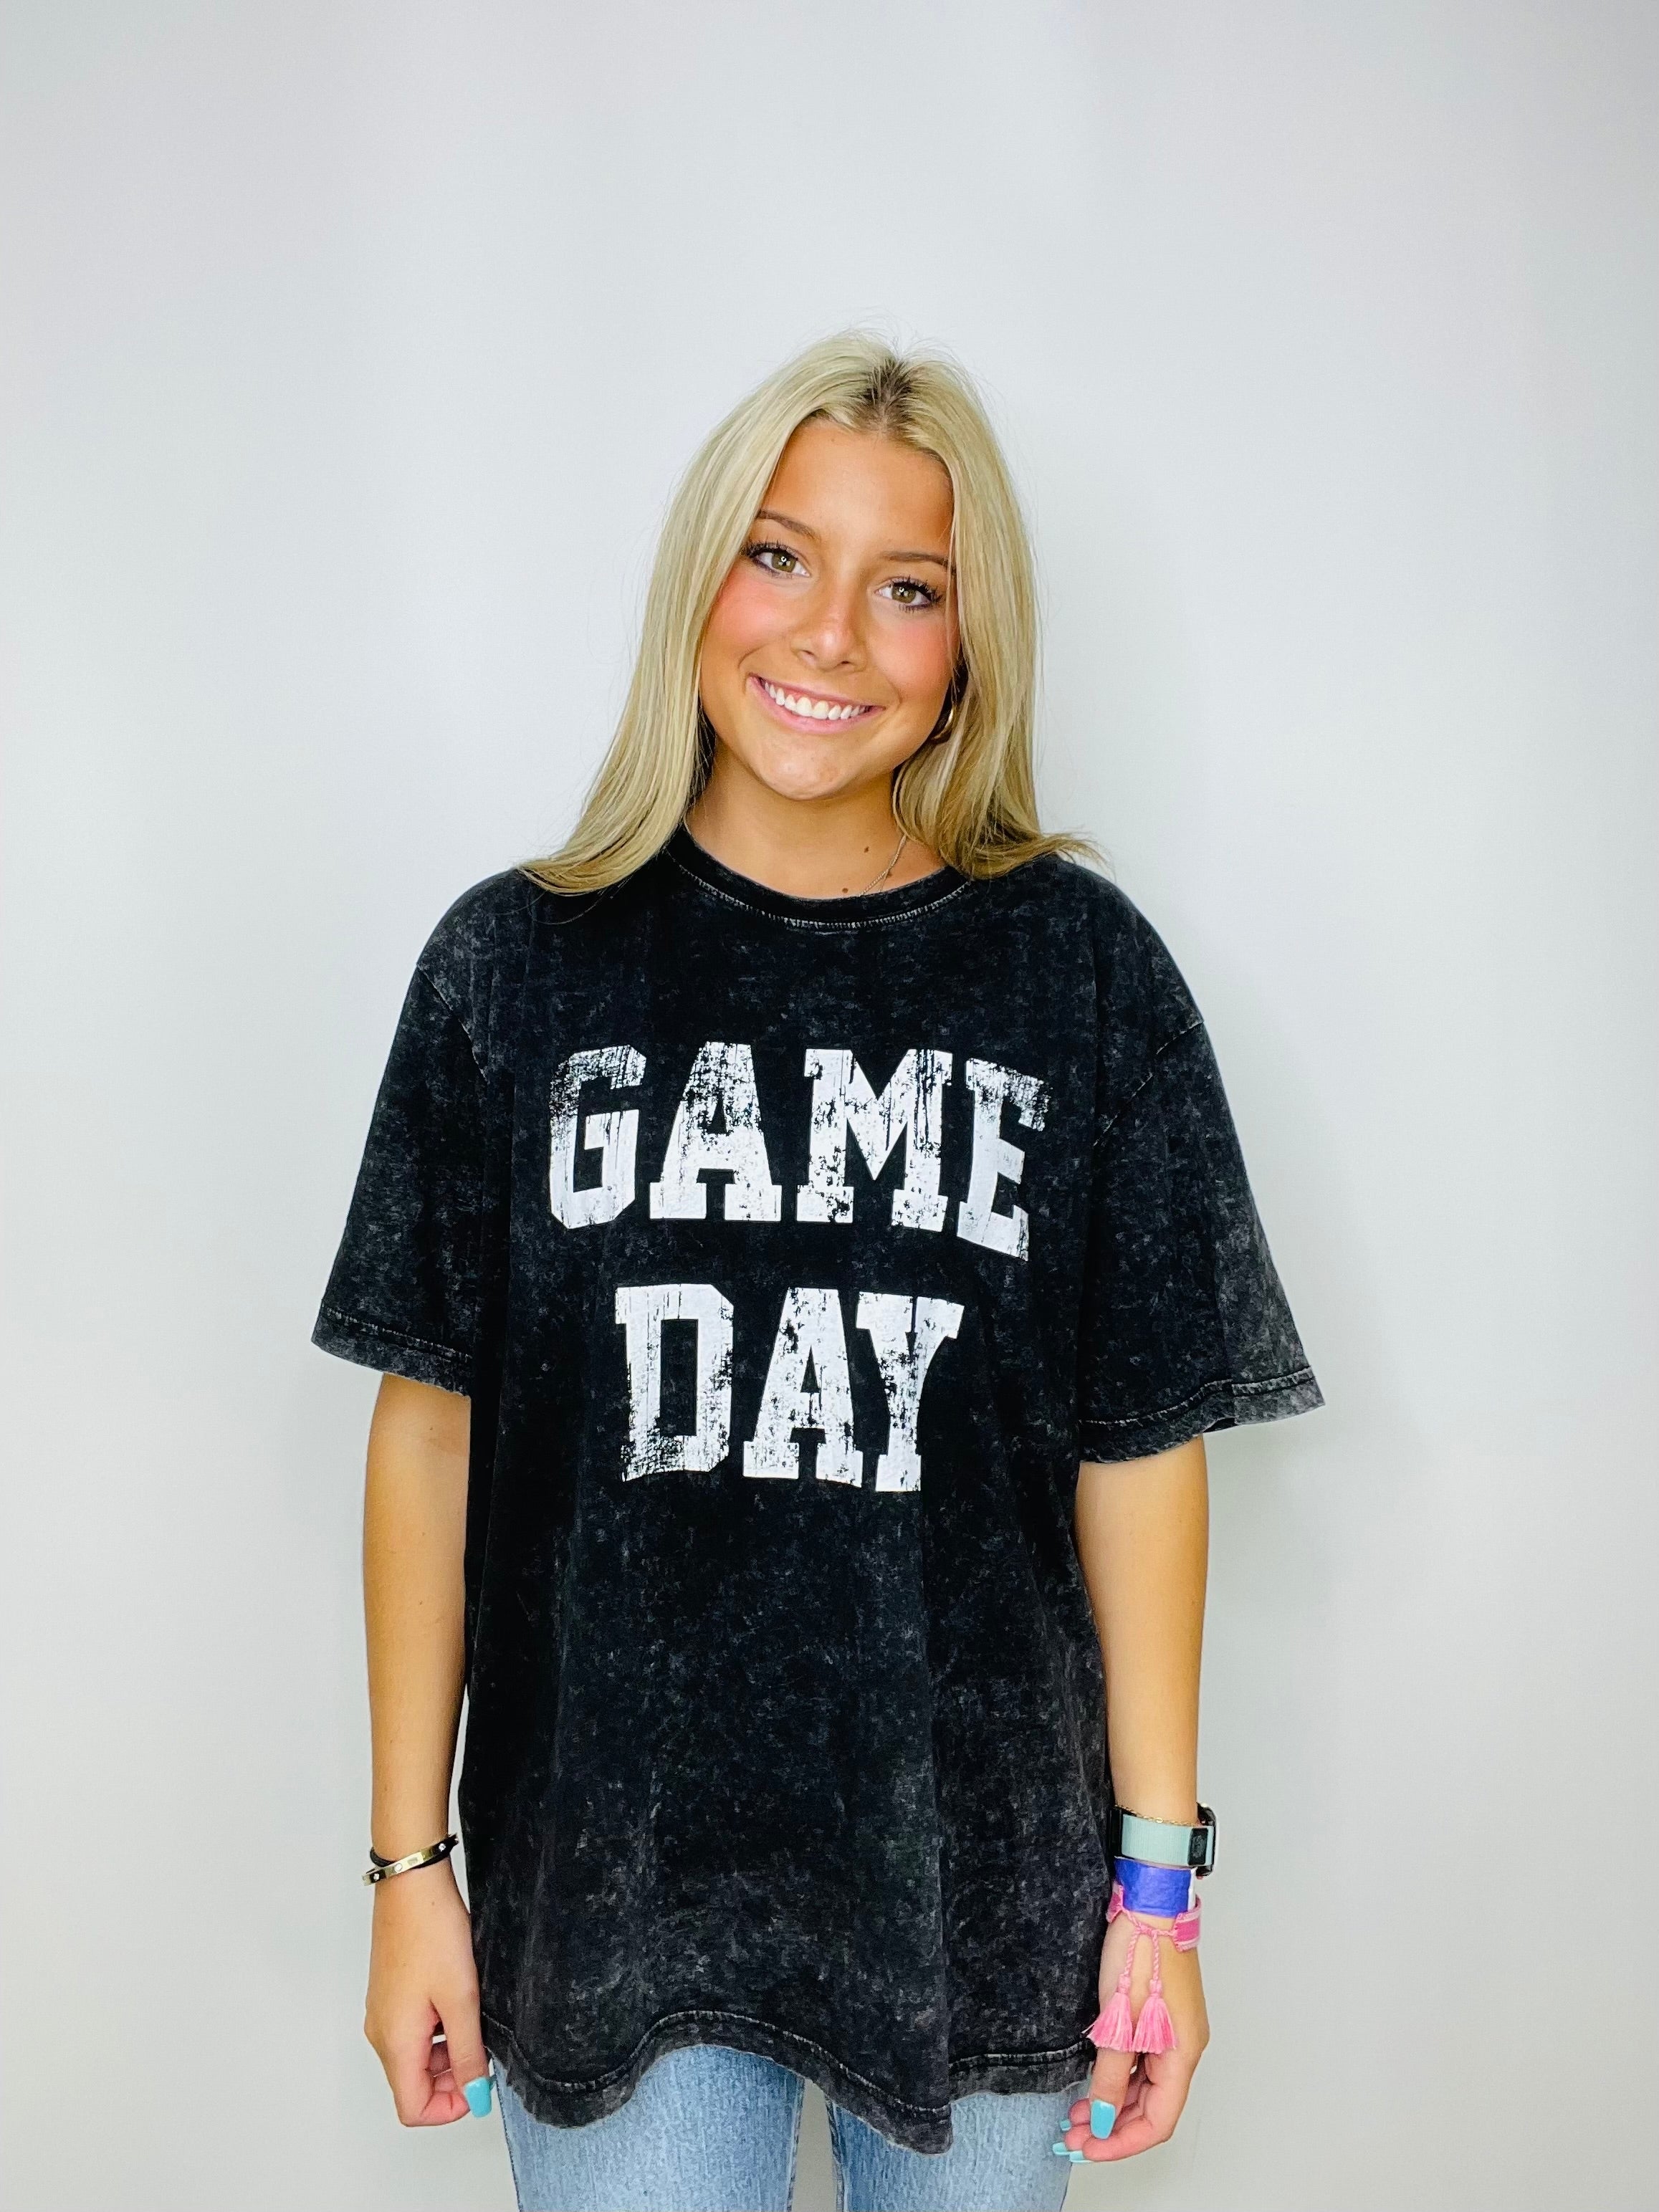 Black Game Day Tee